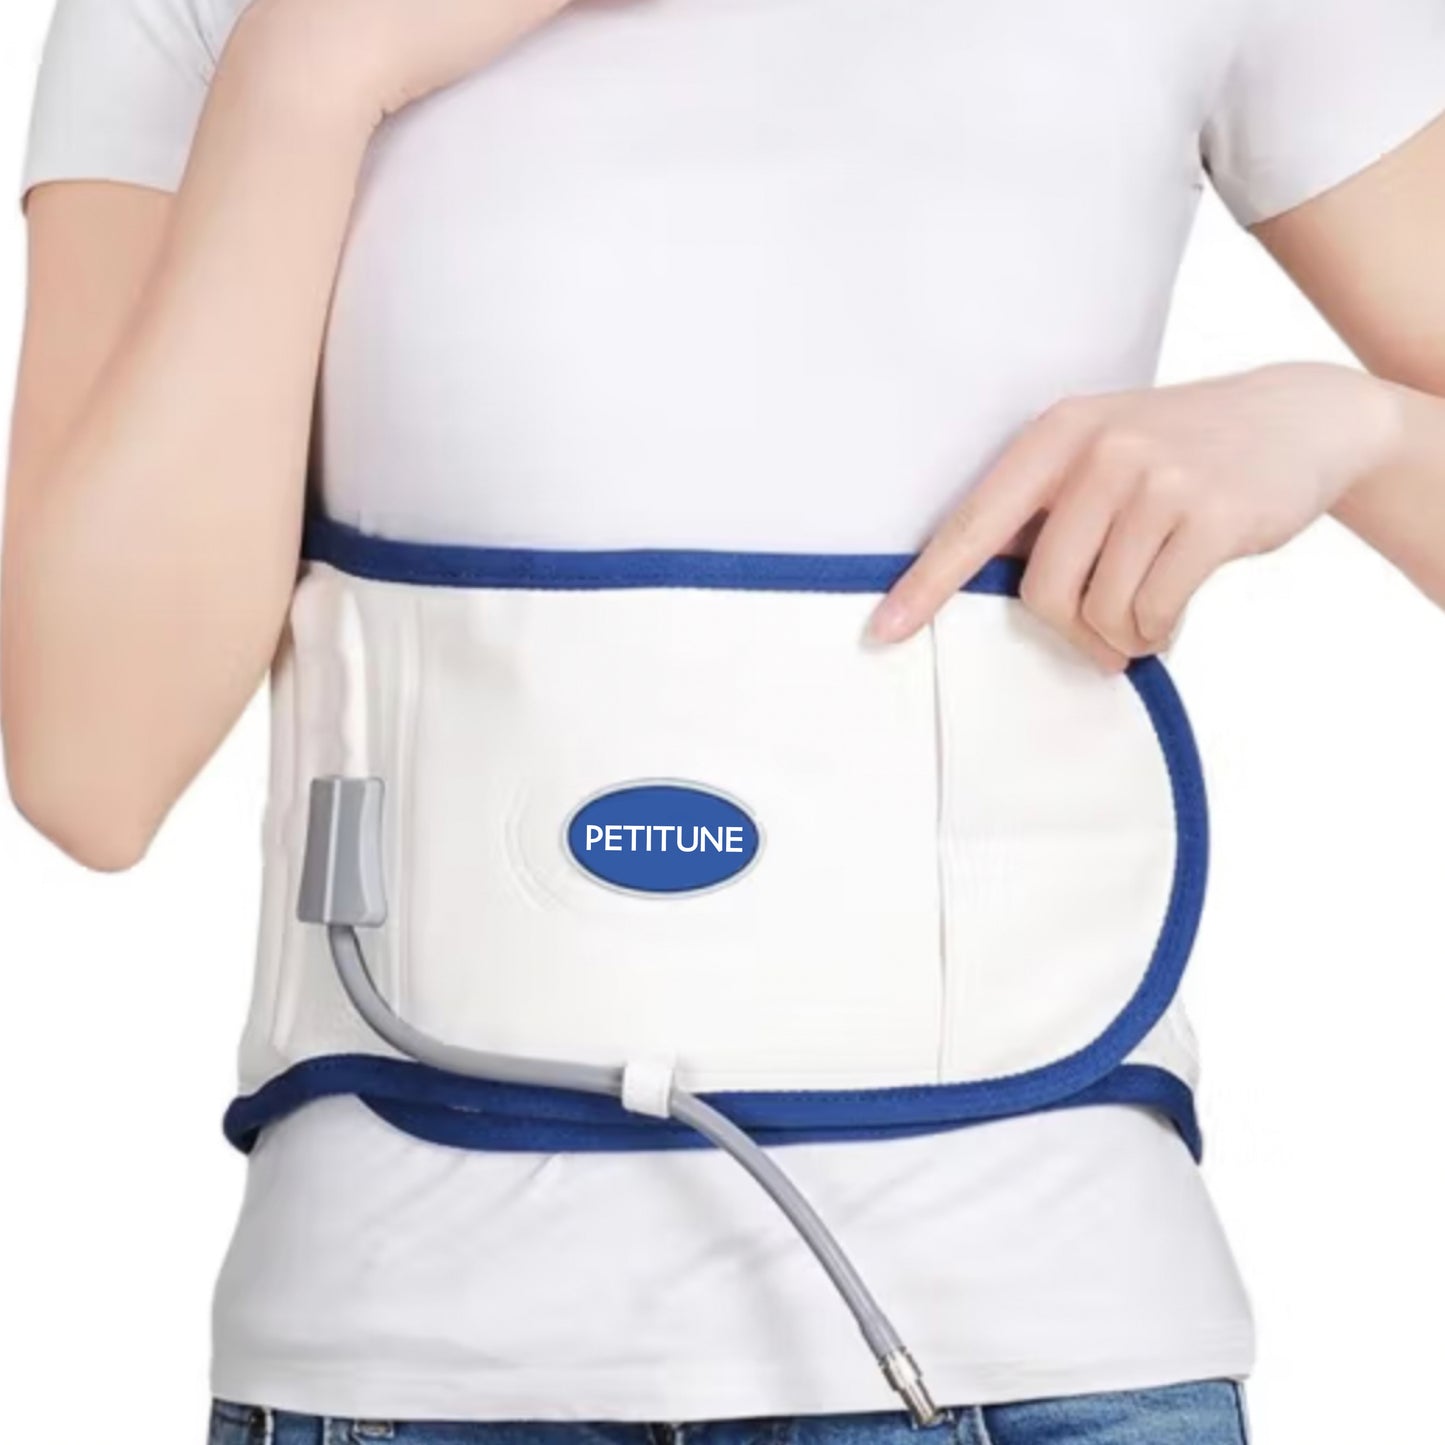 PETITUNE Heating Cushions Electric for Medical Purposes Maternity Support Belts for Medical Purposes